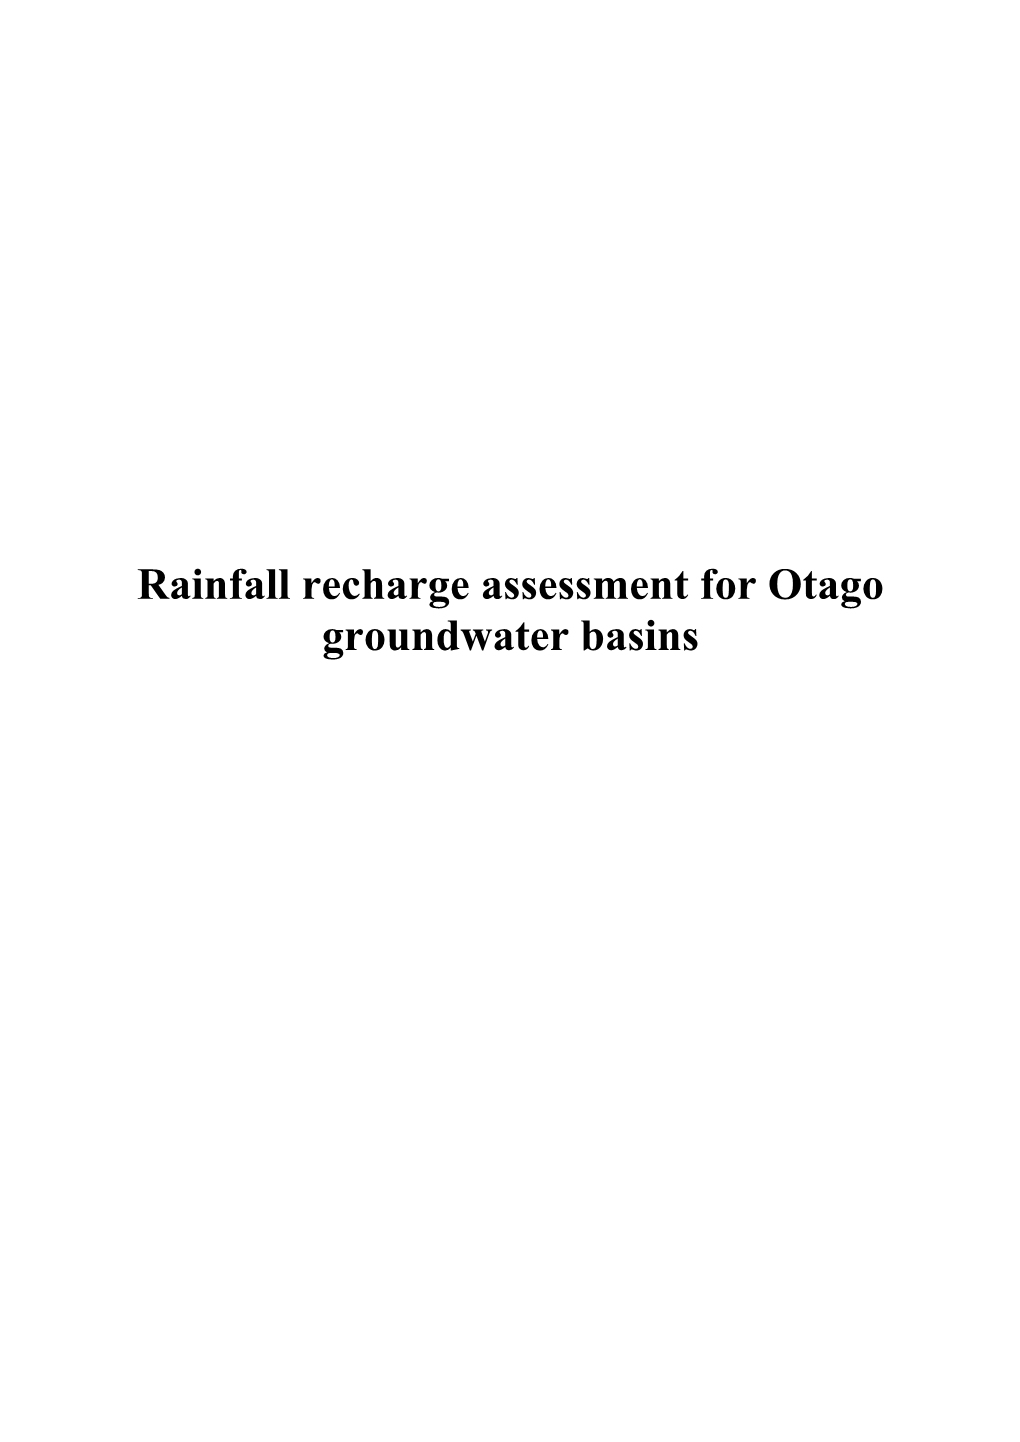 Rainfall Recharge Assessment for Otago Groundwater Basins